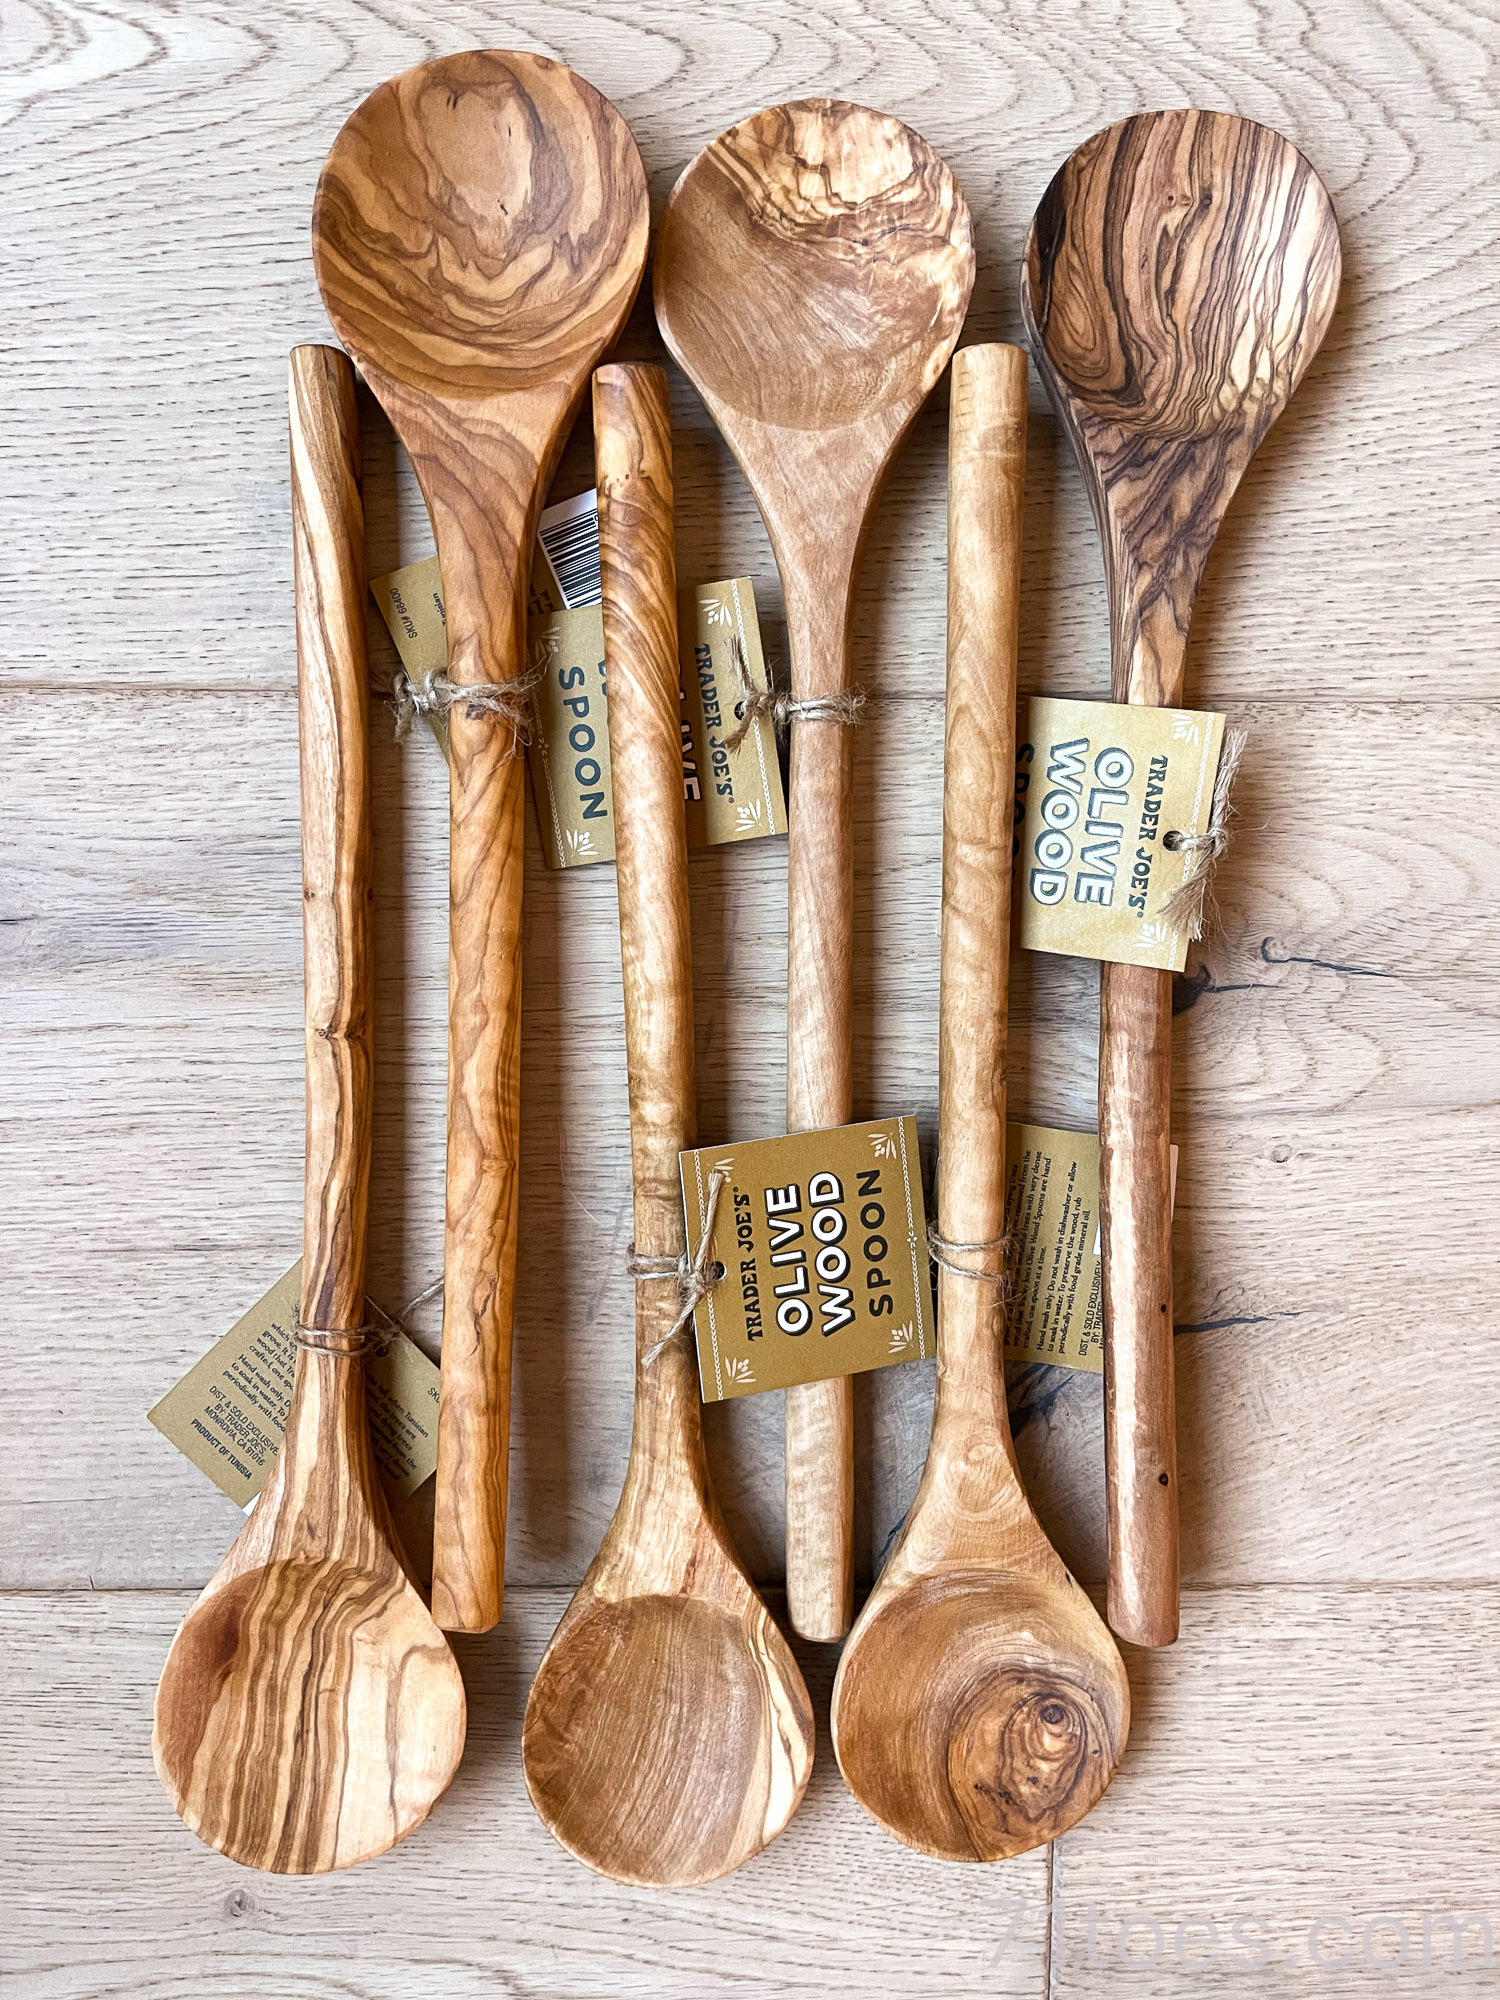 beautiful olive wood spoons lined up together